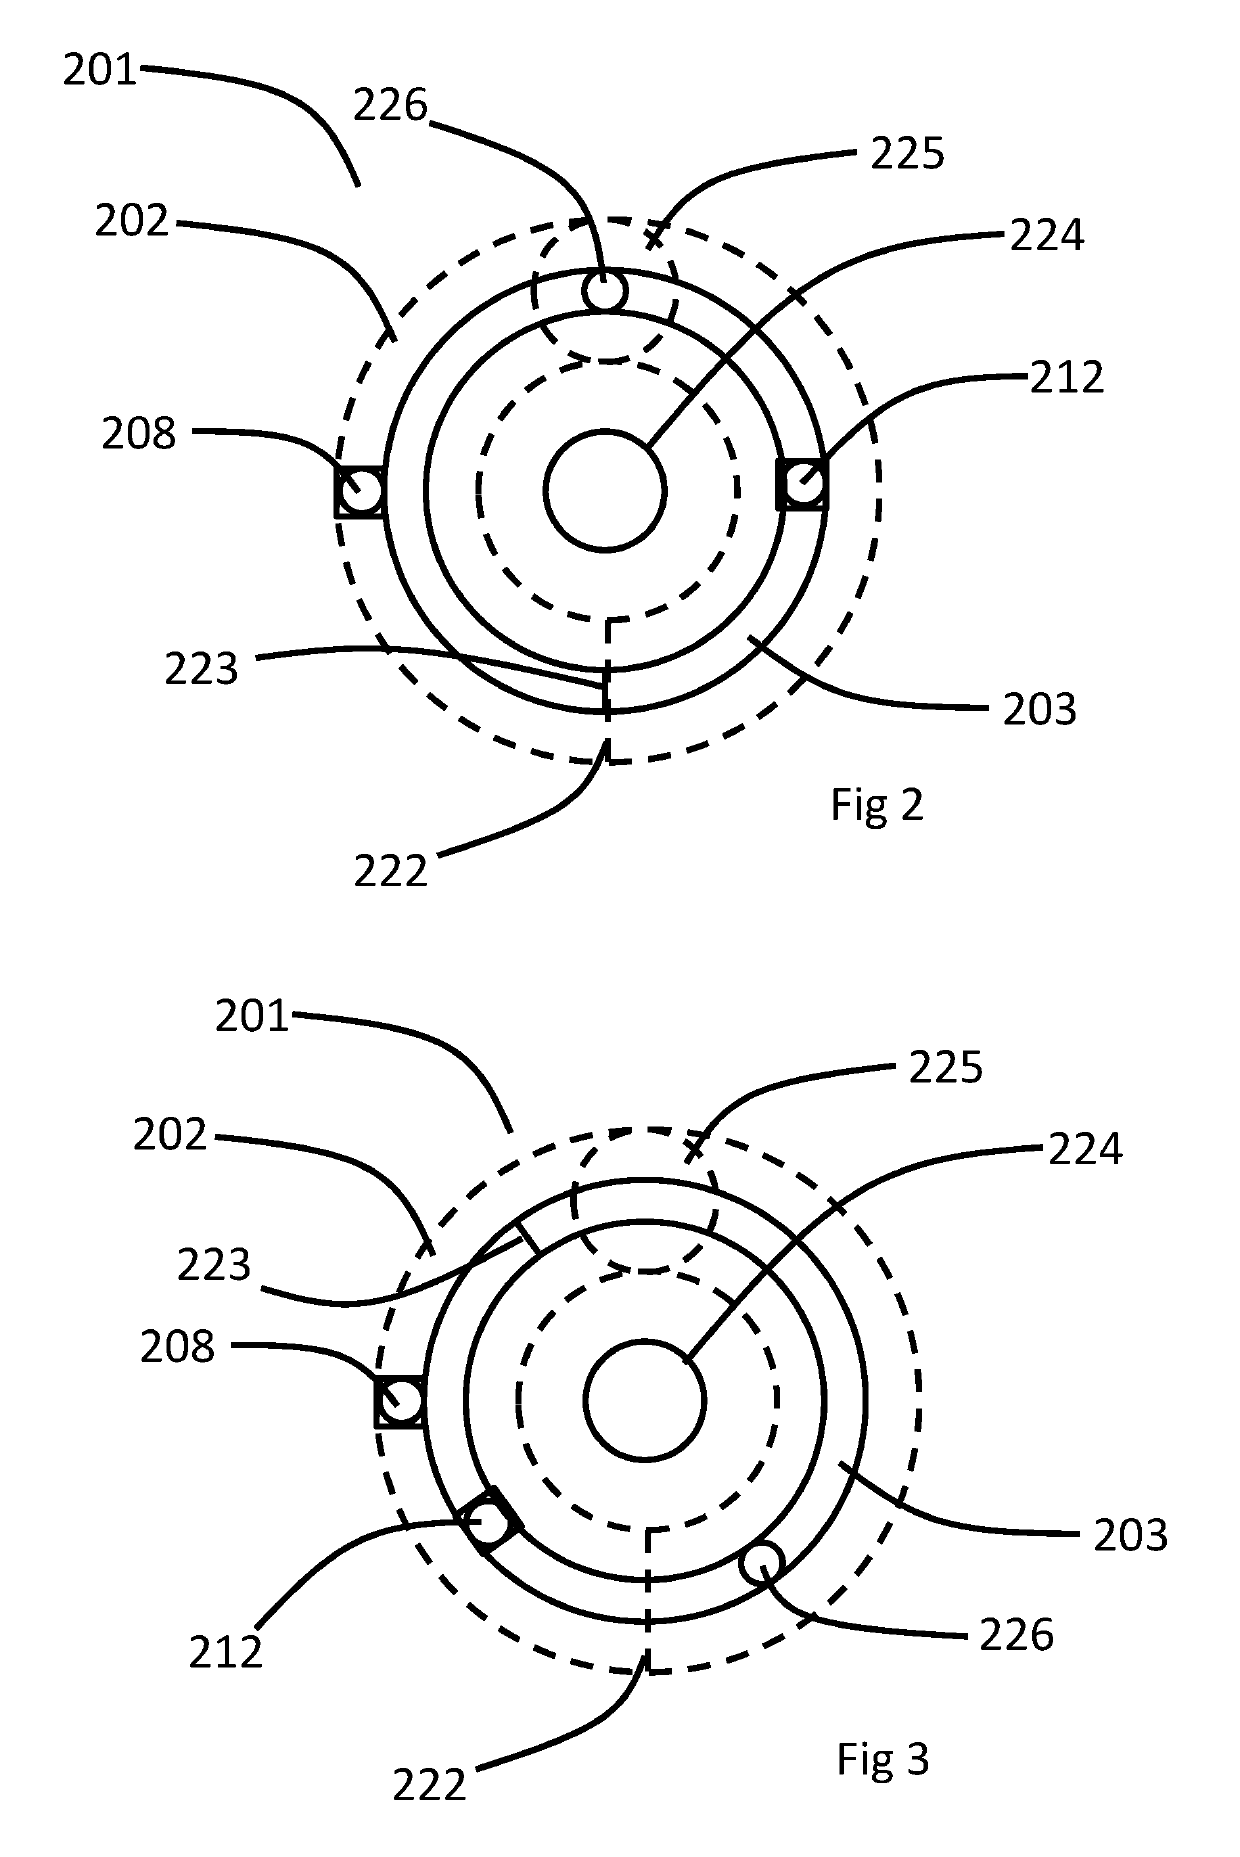 Subsea apparatus for monitoring density or integrity of a subsea structure or its contents and method for generating power on a rotating part of a subsea apparatus for monitoring density or integrity of the subsea structure or its contents